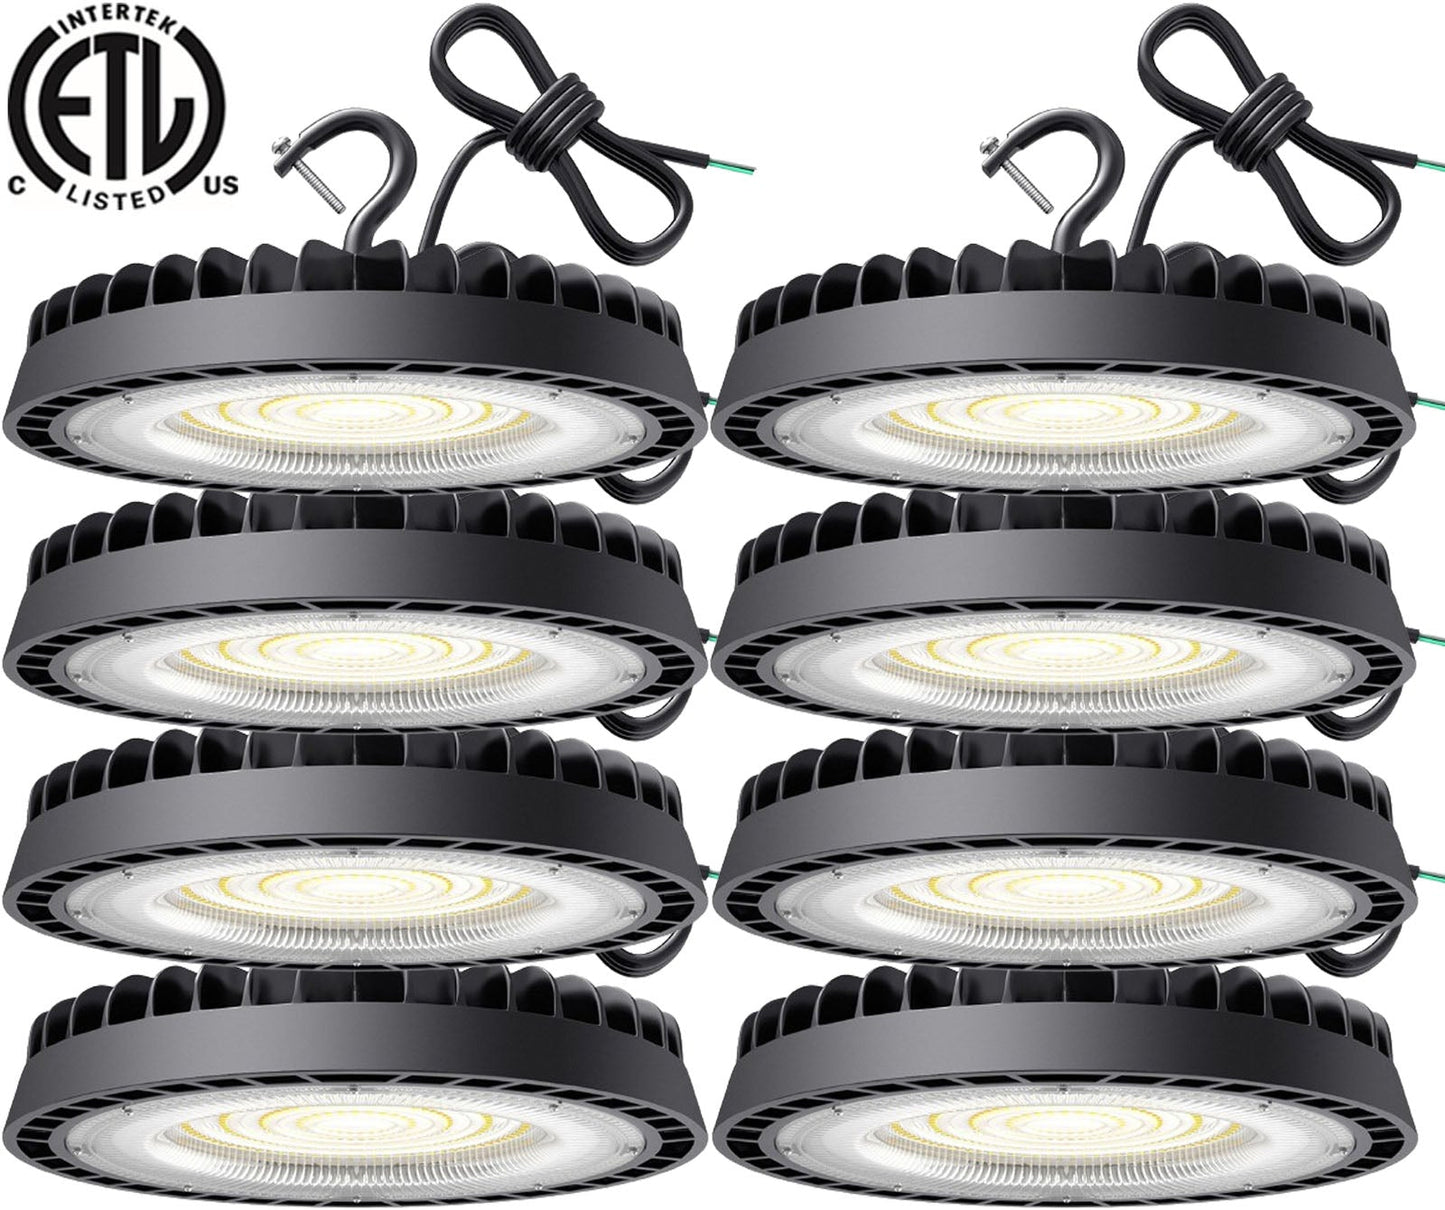 150w UFO LED High Bay Light, Canada 6000k Bright 19500Lm 1m Cable cETL